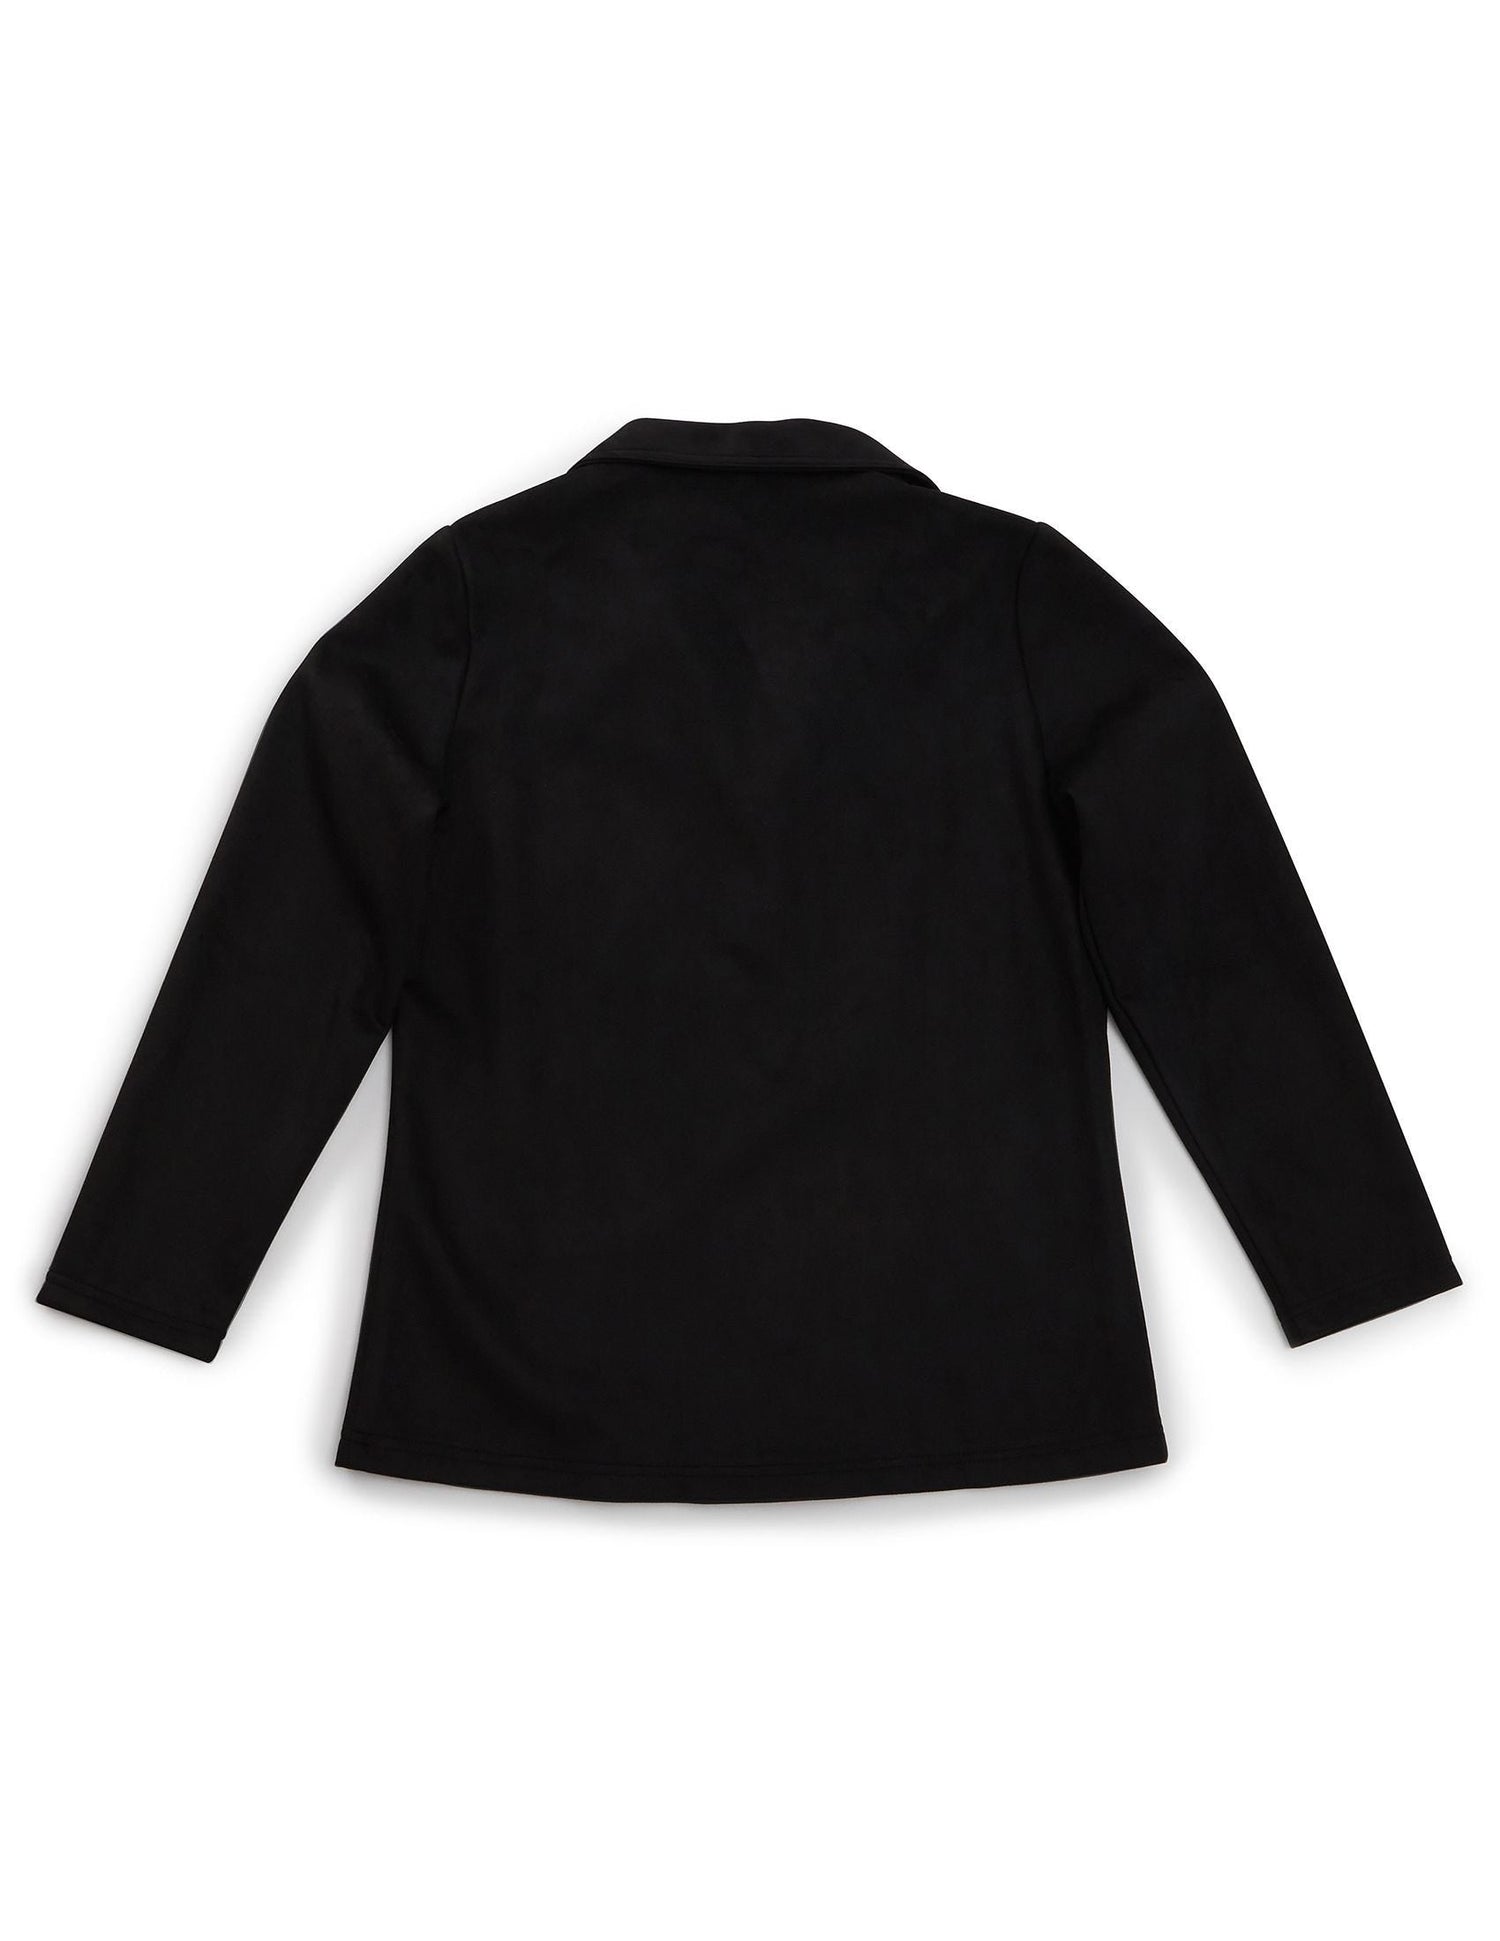 Back of black magnetic zipper jacket with collar